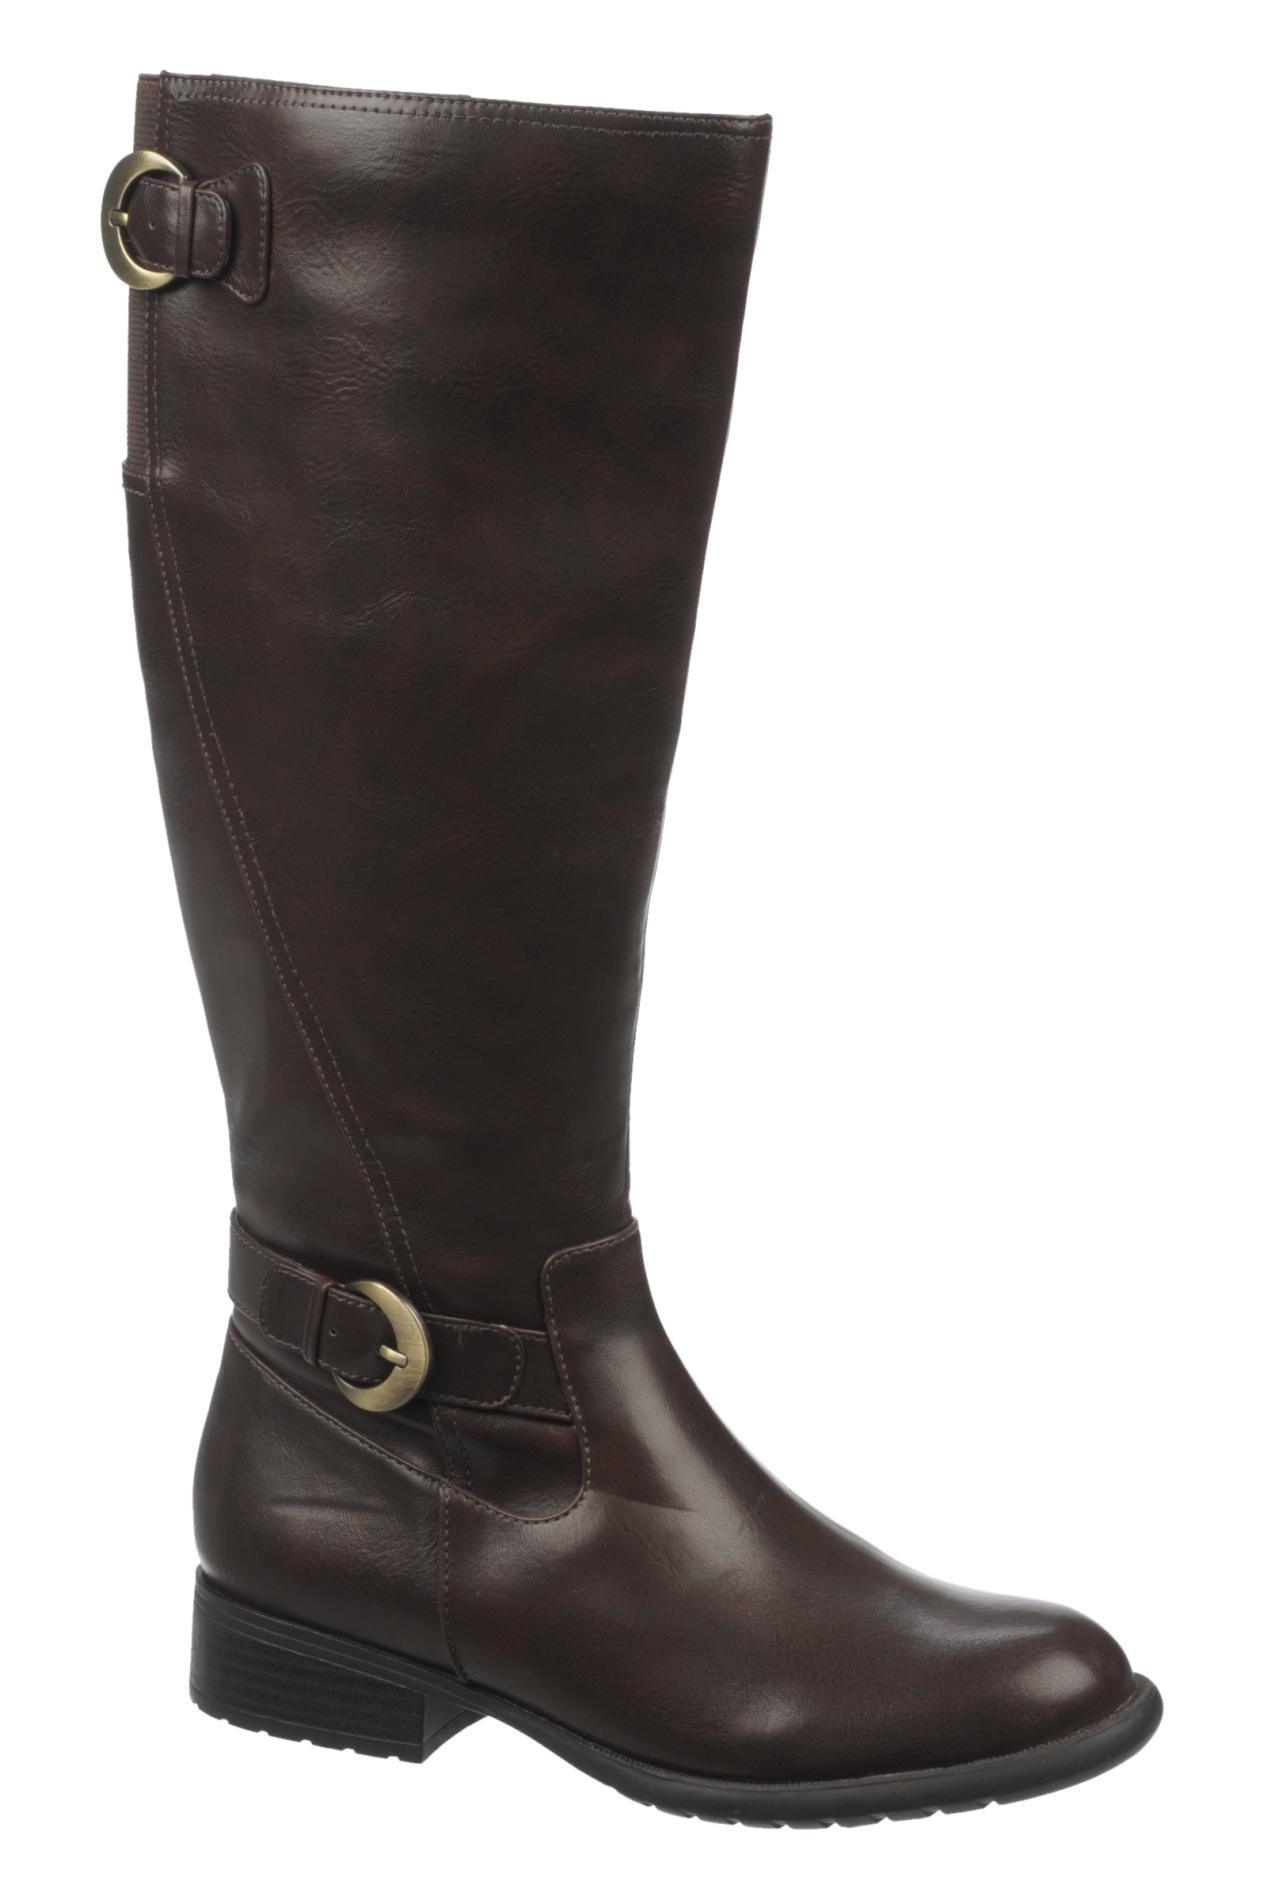 Hush Puppies Women's Xylans Knee-High Extended Calf Riding Boot - Brown